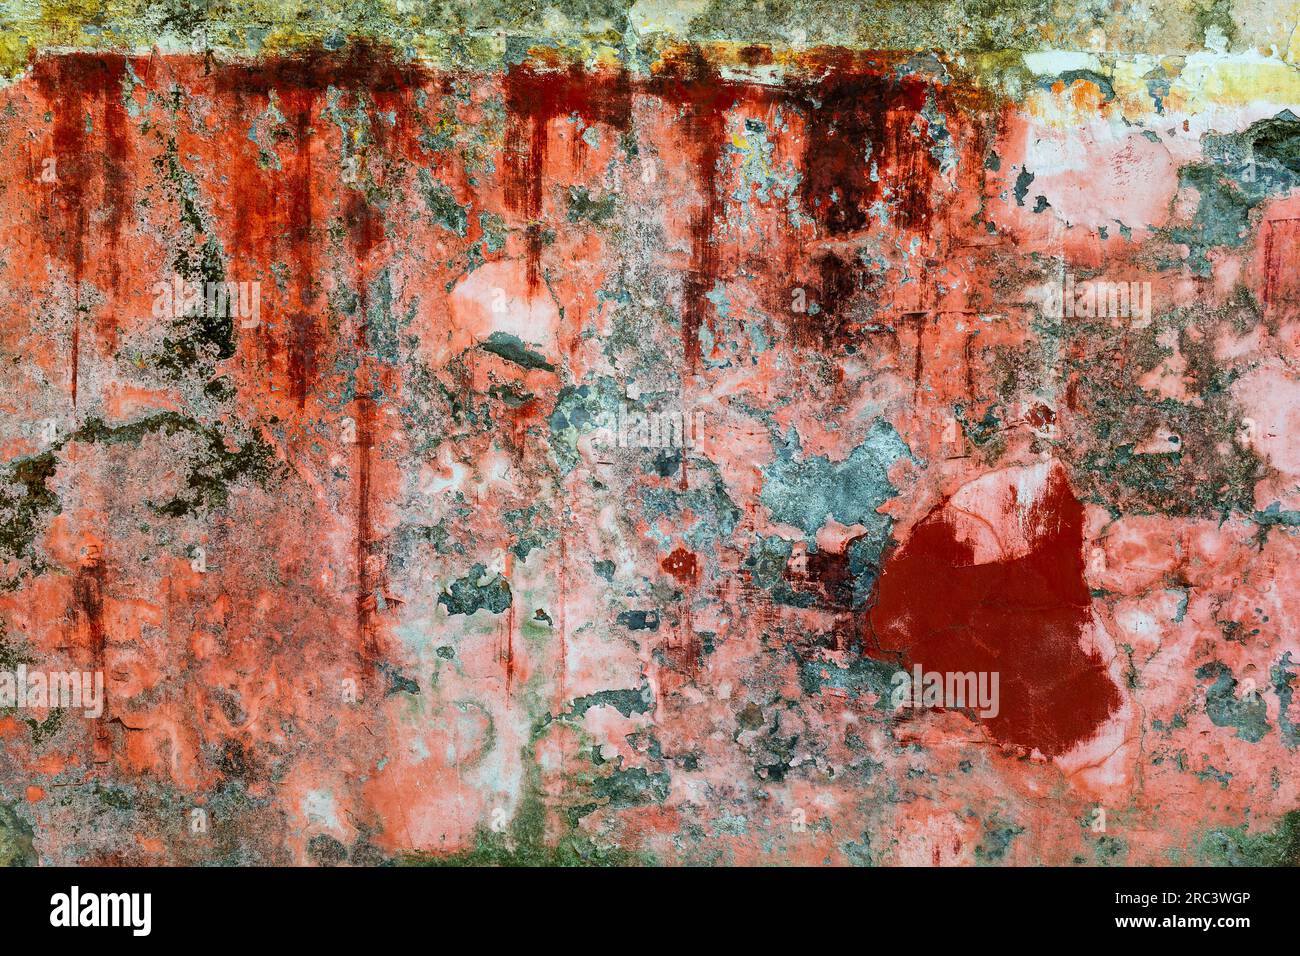 Old wall, peeling orange paint colorful texture Stock Photo